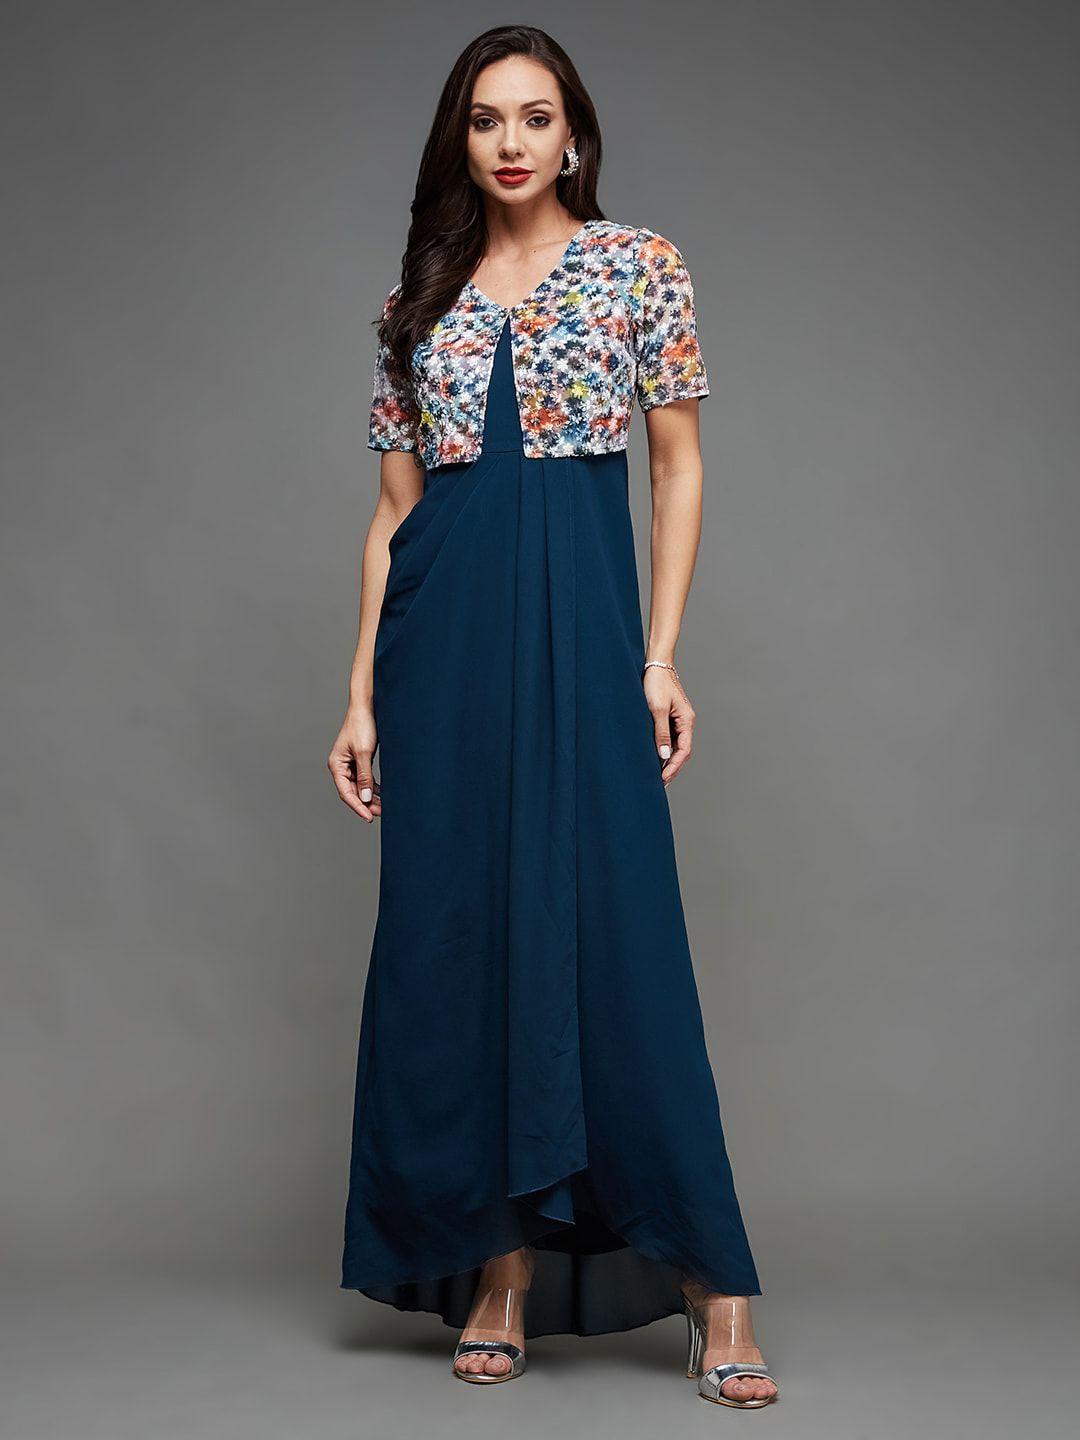 miss chase teal georgette maxi dress